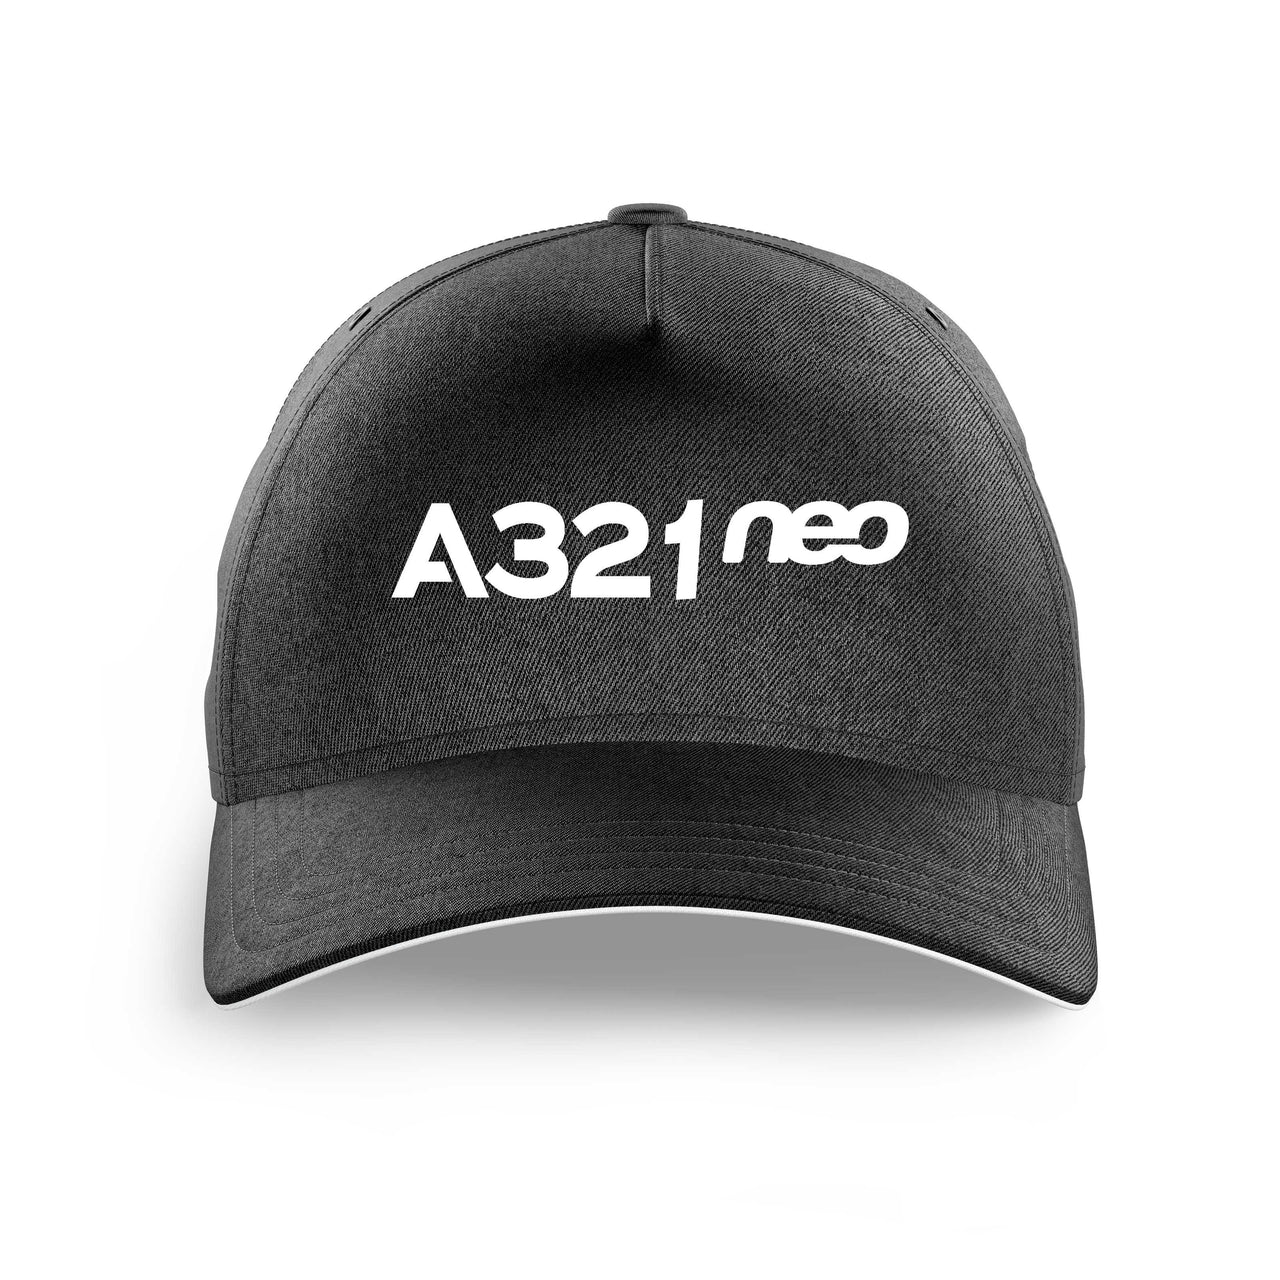 A321neo & Text Printed Hats